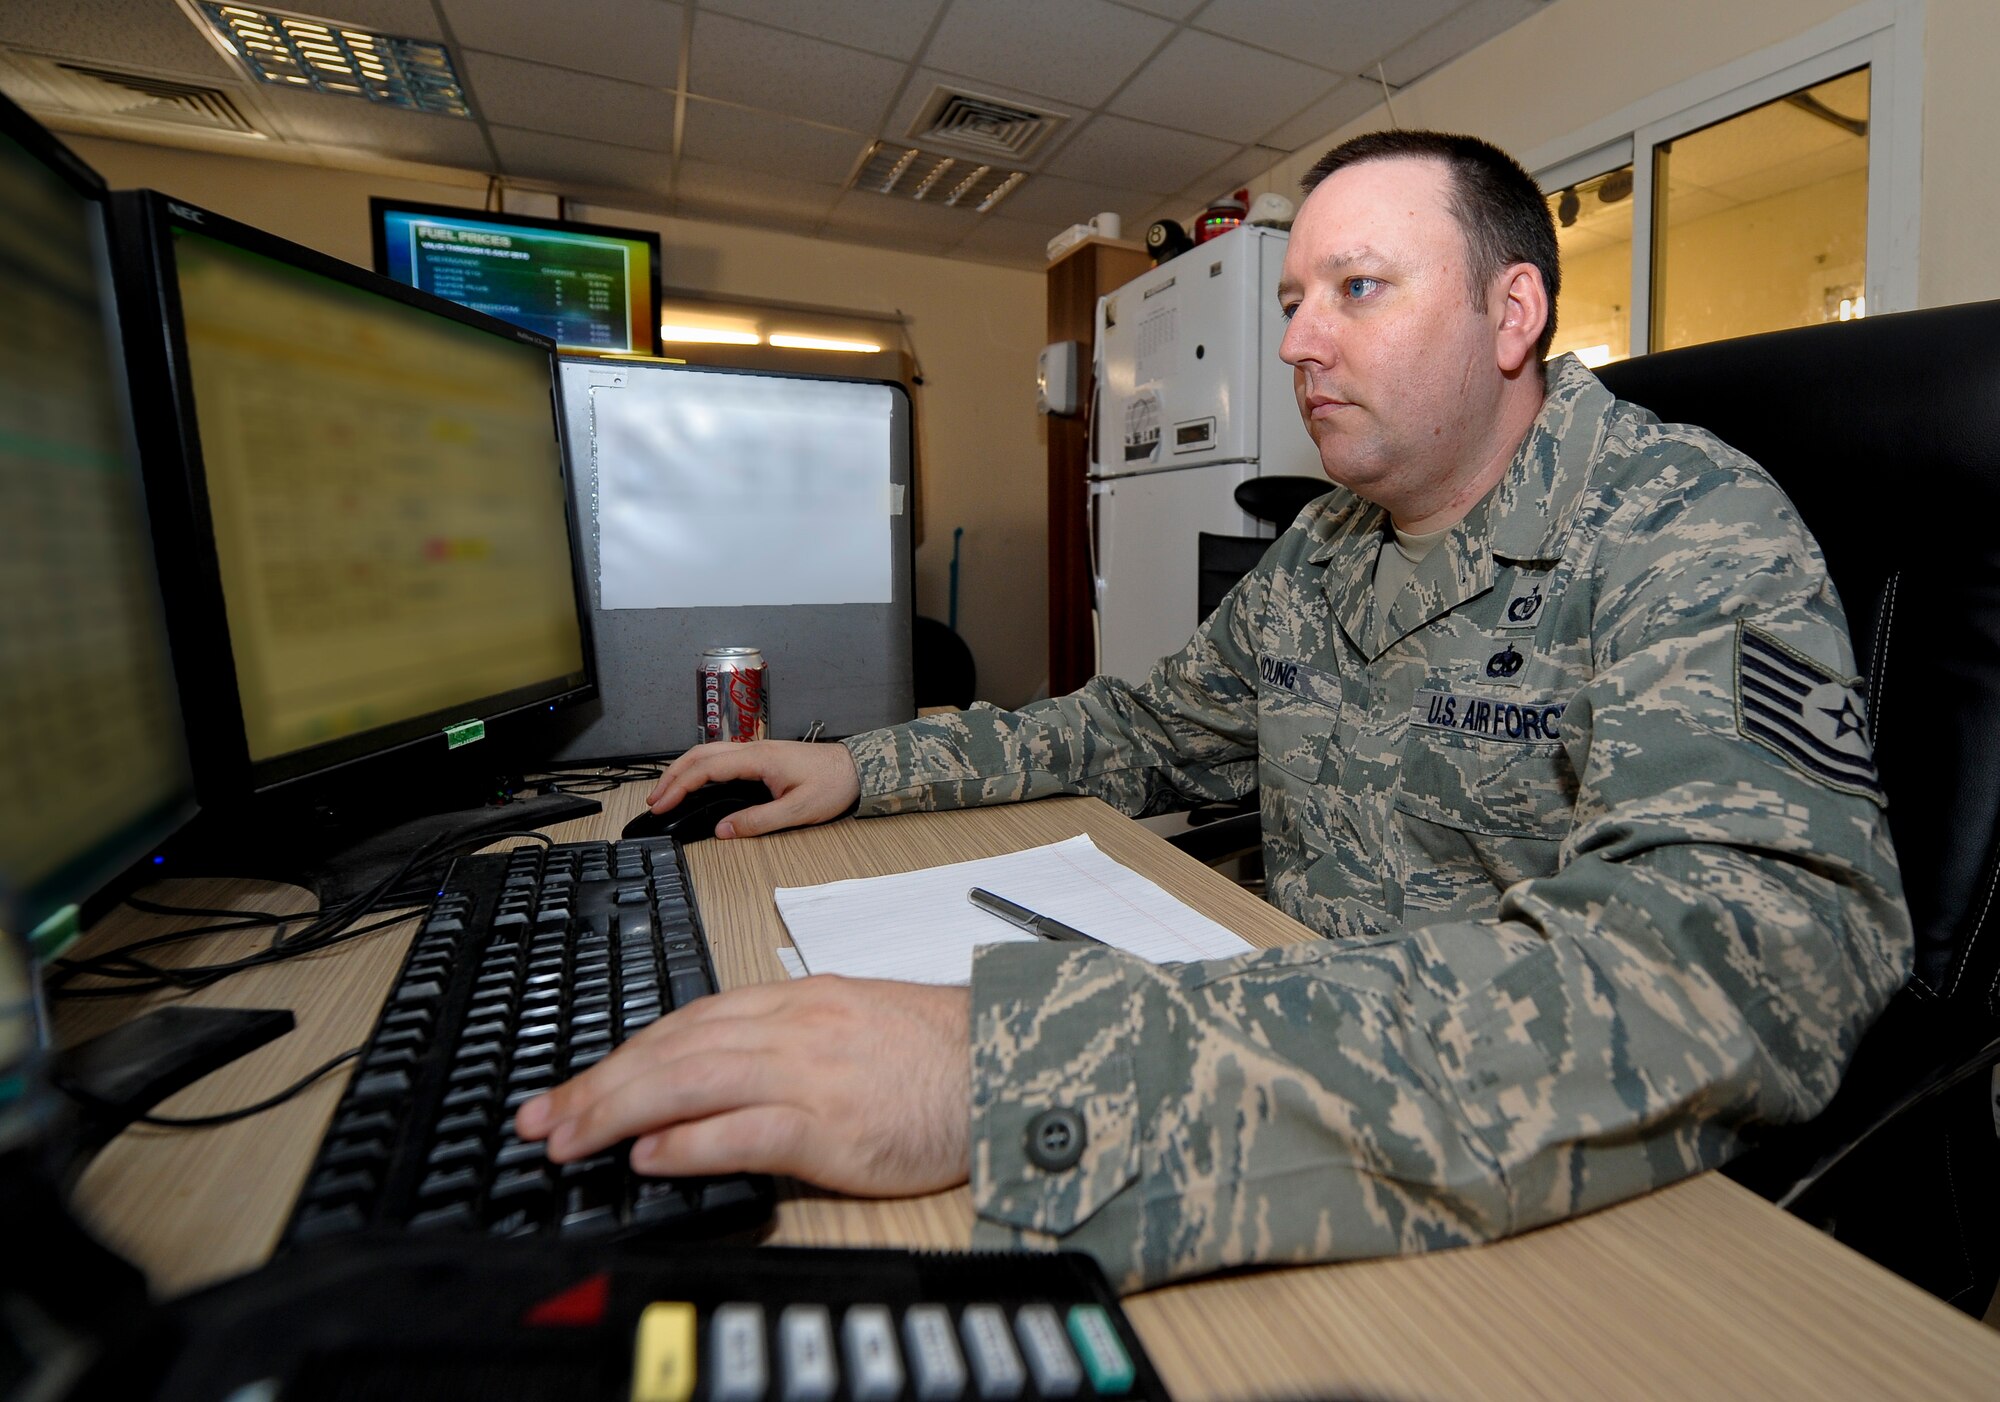 Tech. Sgt. David Young inputs data on the Global Decision Support System as part of the 8th Expeditionary Air Mobility Squadron Air Mobility Command Center's mission responsibilities at the 379th Air Expeditionary Wing in Southwest Asia, July 2, 2013. The GDSS is a U.S. Transportation Command-funded system providing combatant commanders Mobility Air Forces Command and Control information for the Defense Transportation System. Young is the 8th EAMS AMCC flight chief deployed from Royal Air Force Lakenheath, England. (U.S. Air Force photo/Senior Airman Benjamin Stratton)